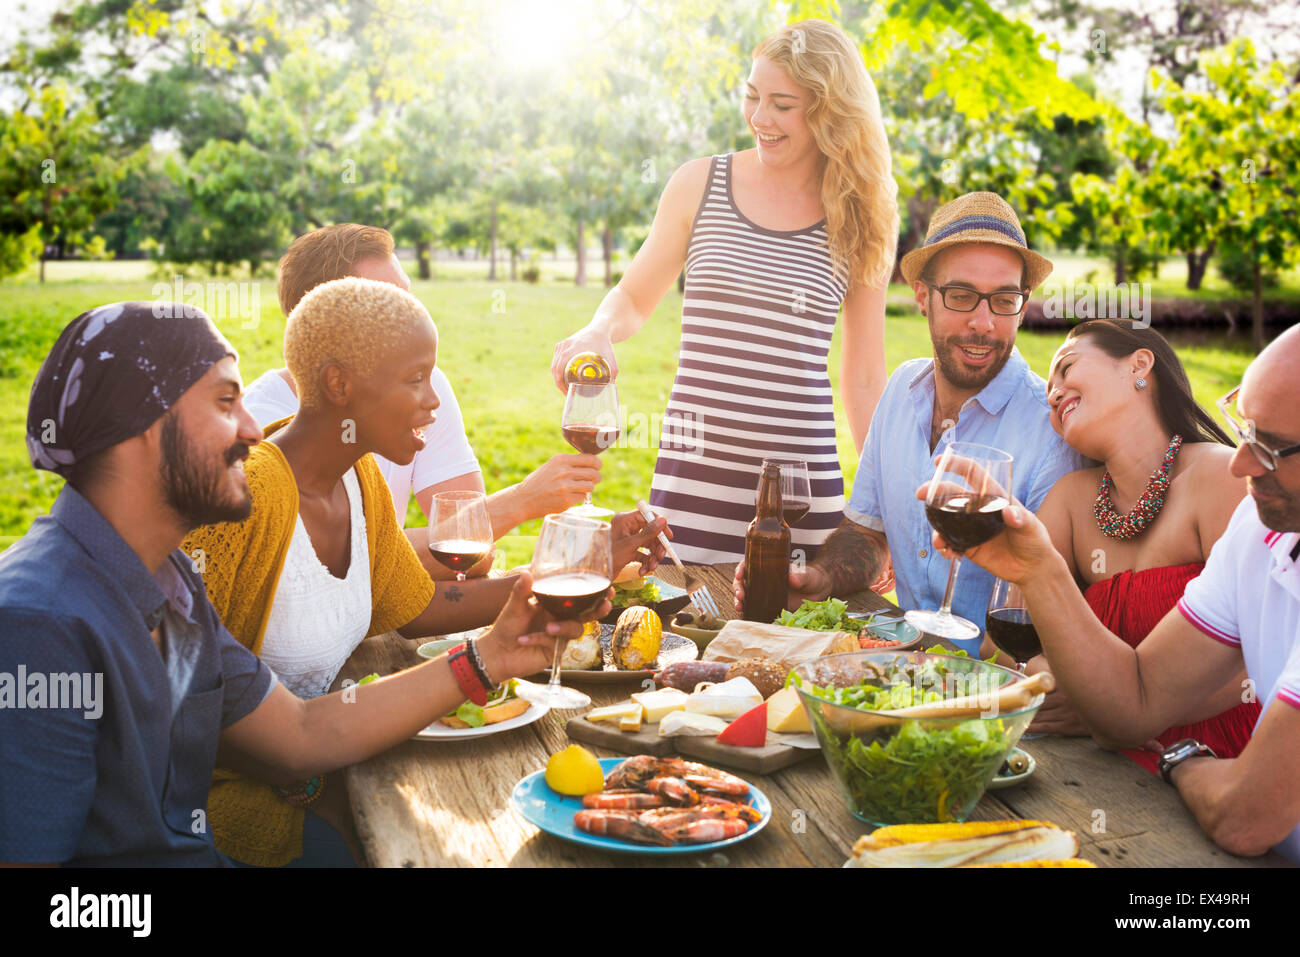 Friends Outdoors Party Celebration Hanging out Concept Stock Photo